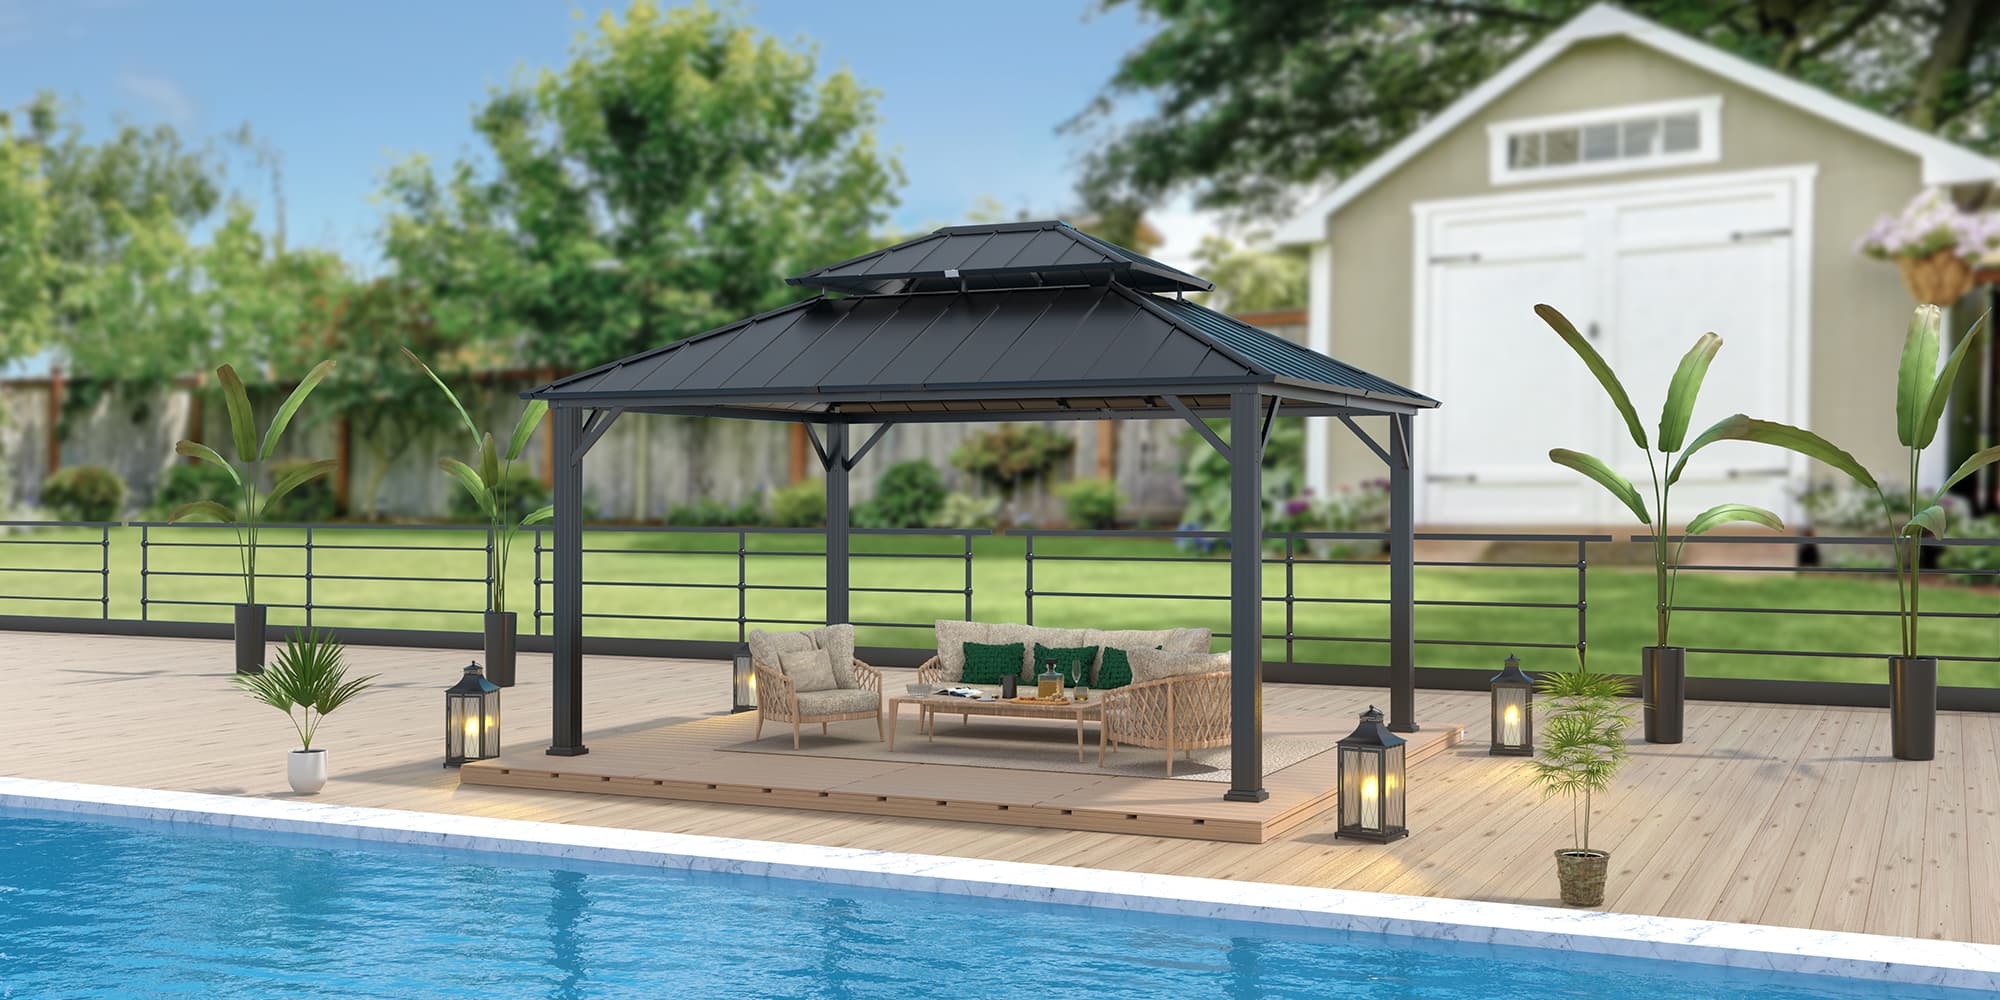 Bring the Party Outside with Olilawn Hardtop Gazebos